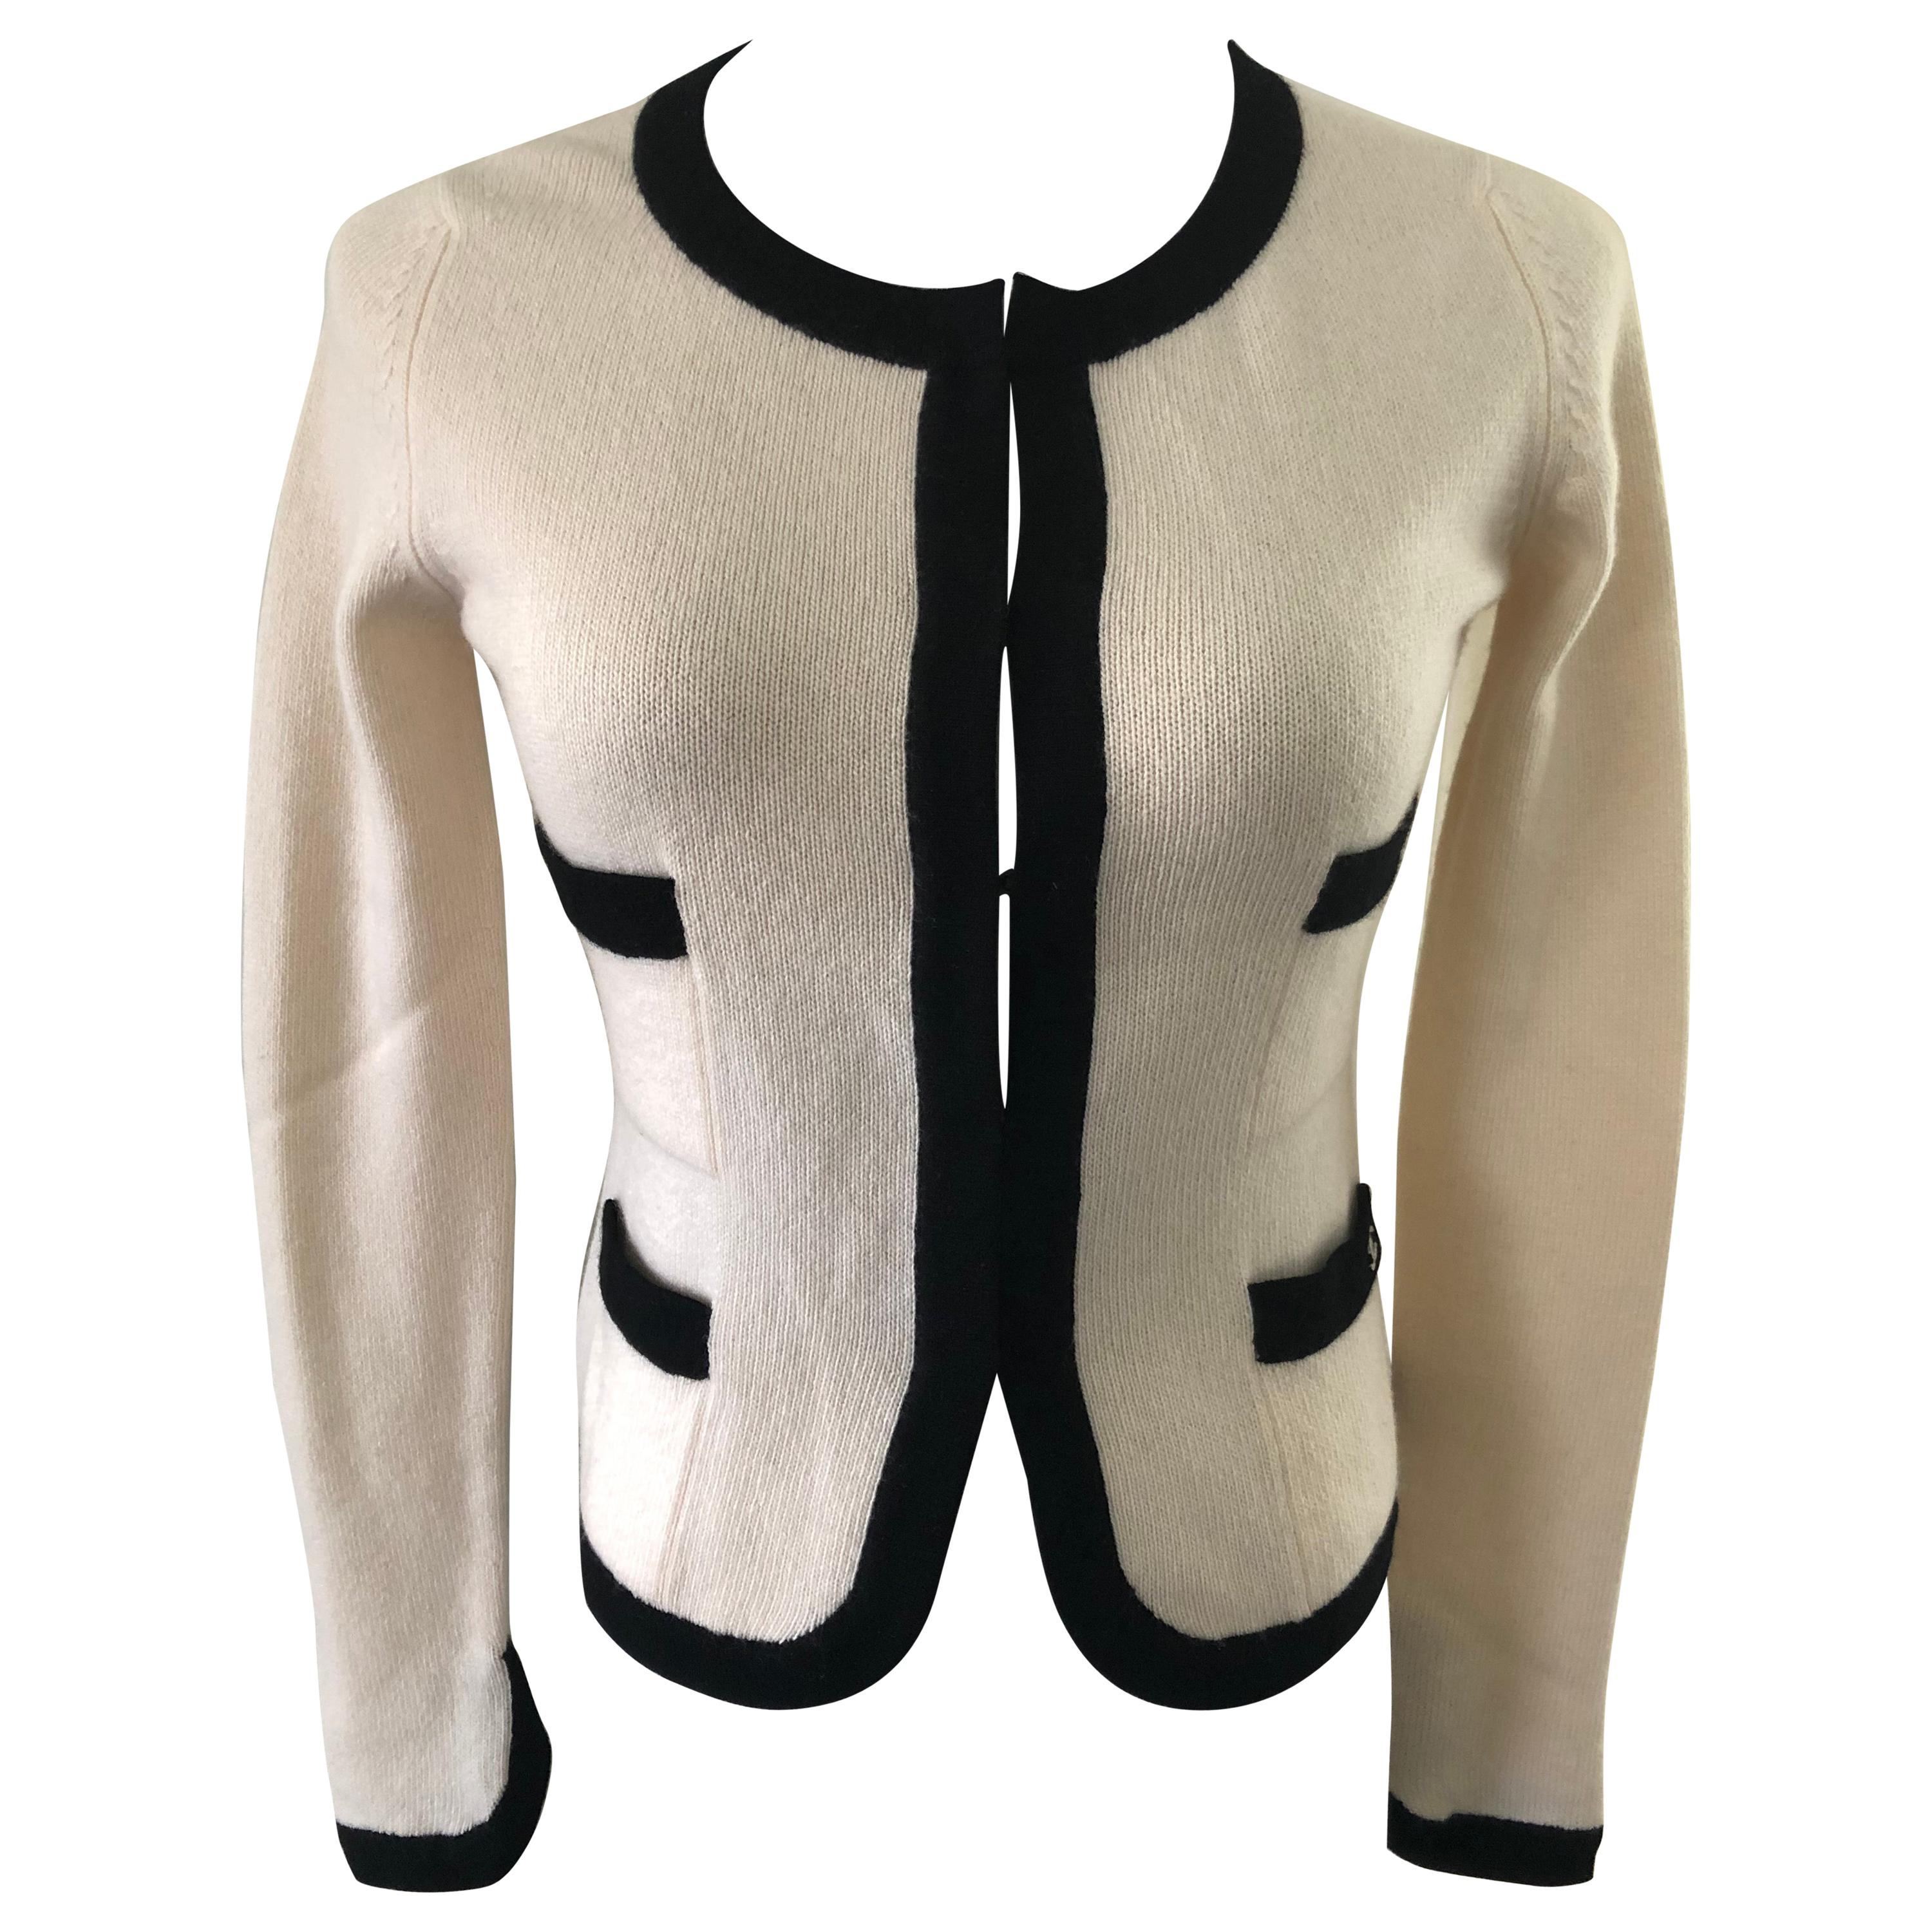 Chanel Cream and Black Cashmere Cardigan Size 36 Fr.